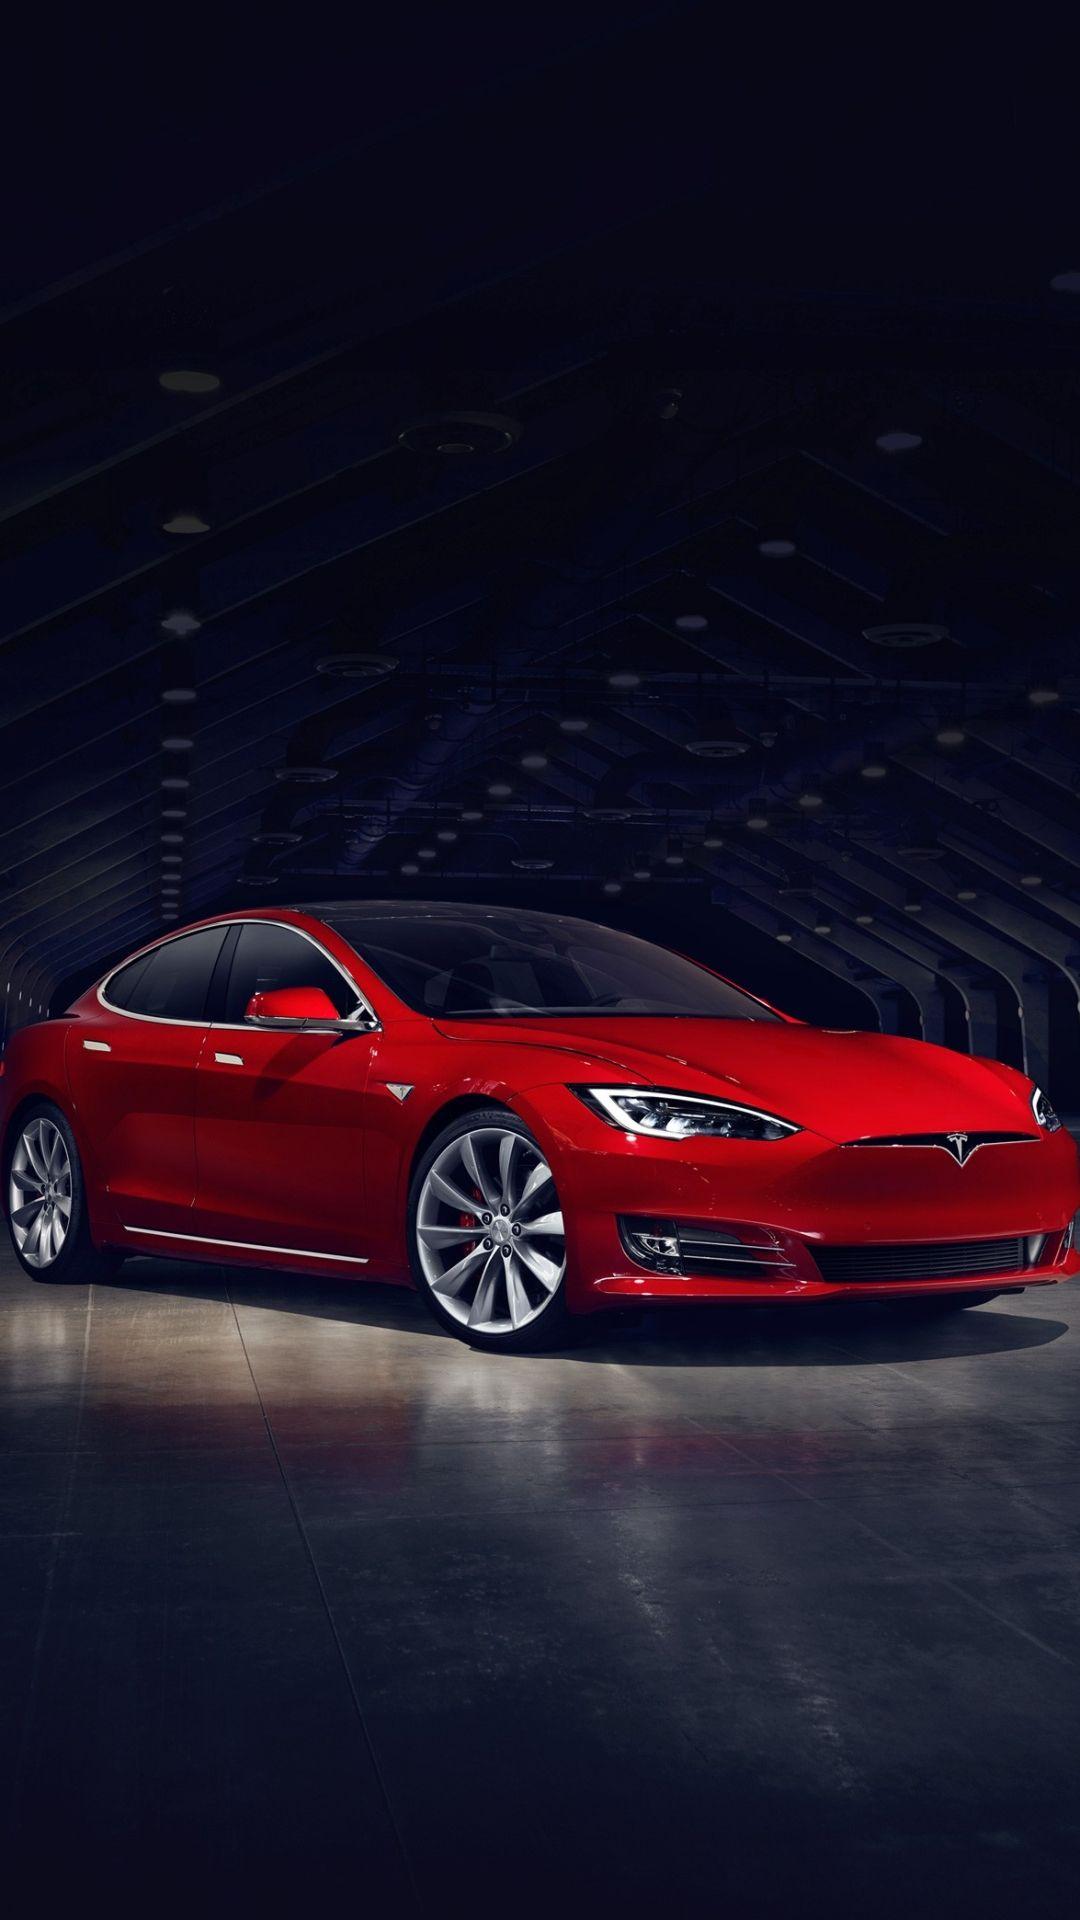 Red Tesla Model S No Grill #iPhone #wallpaper. iPhone 6 8